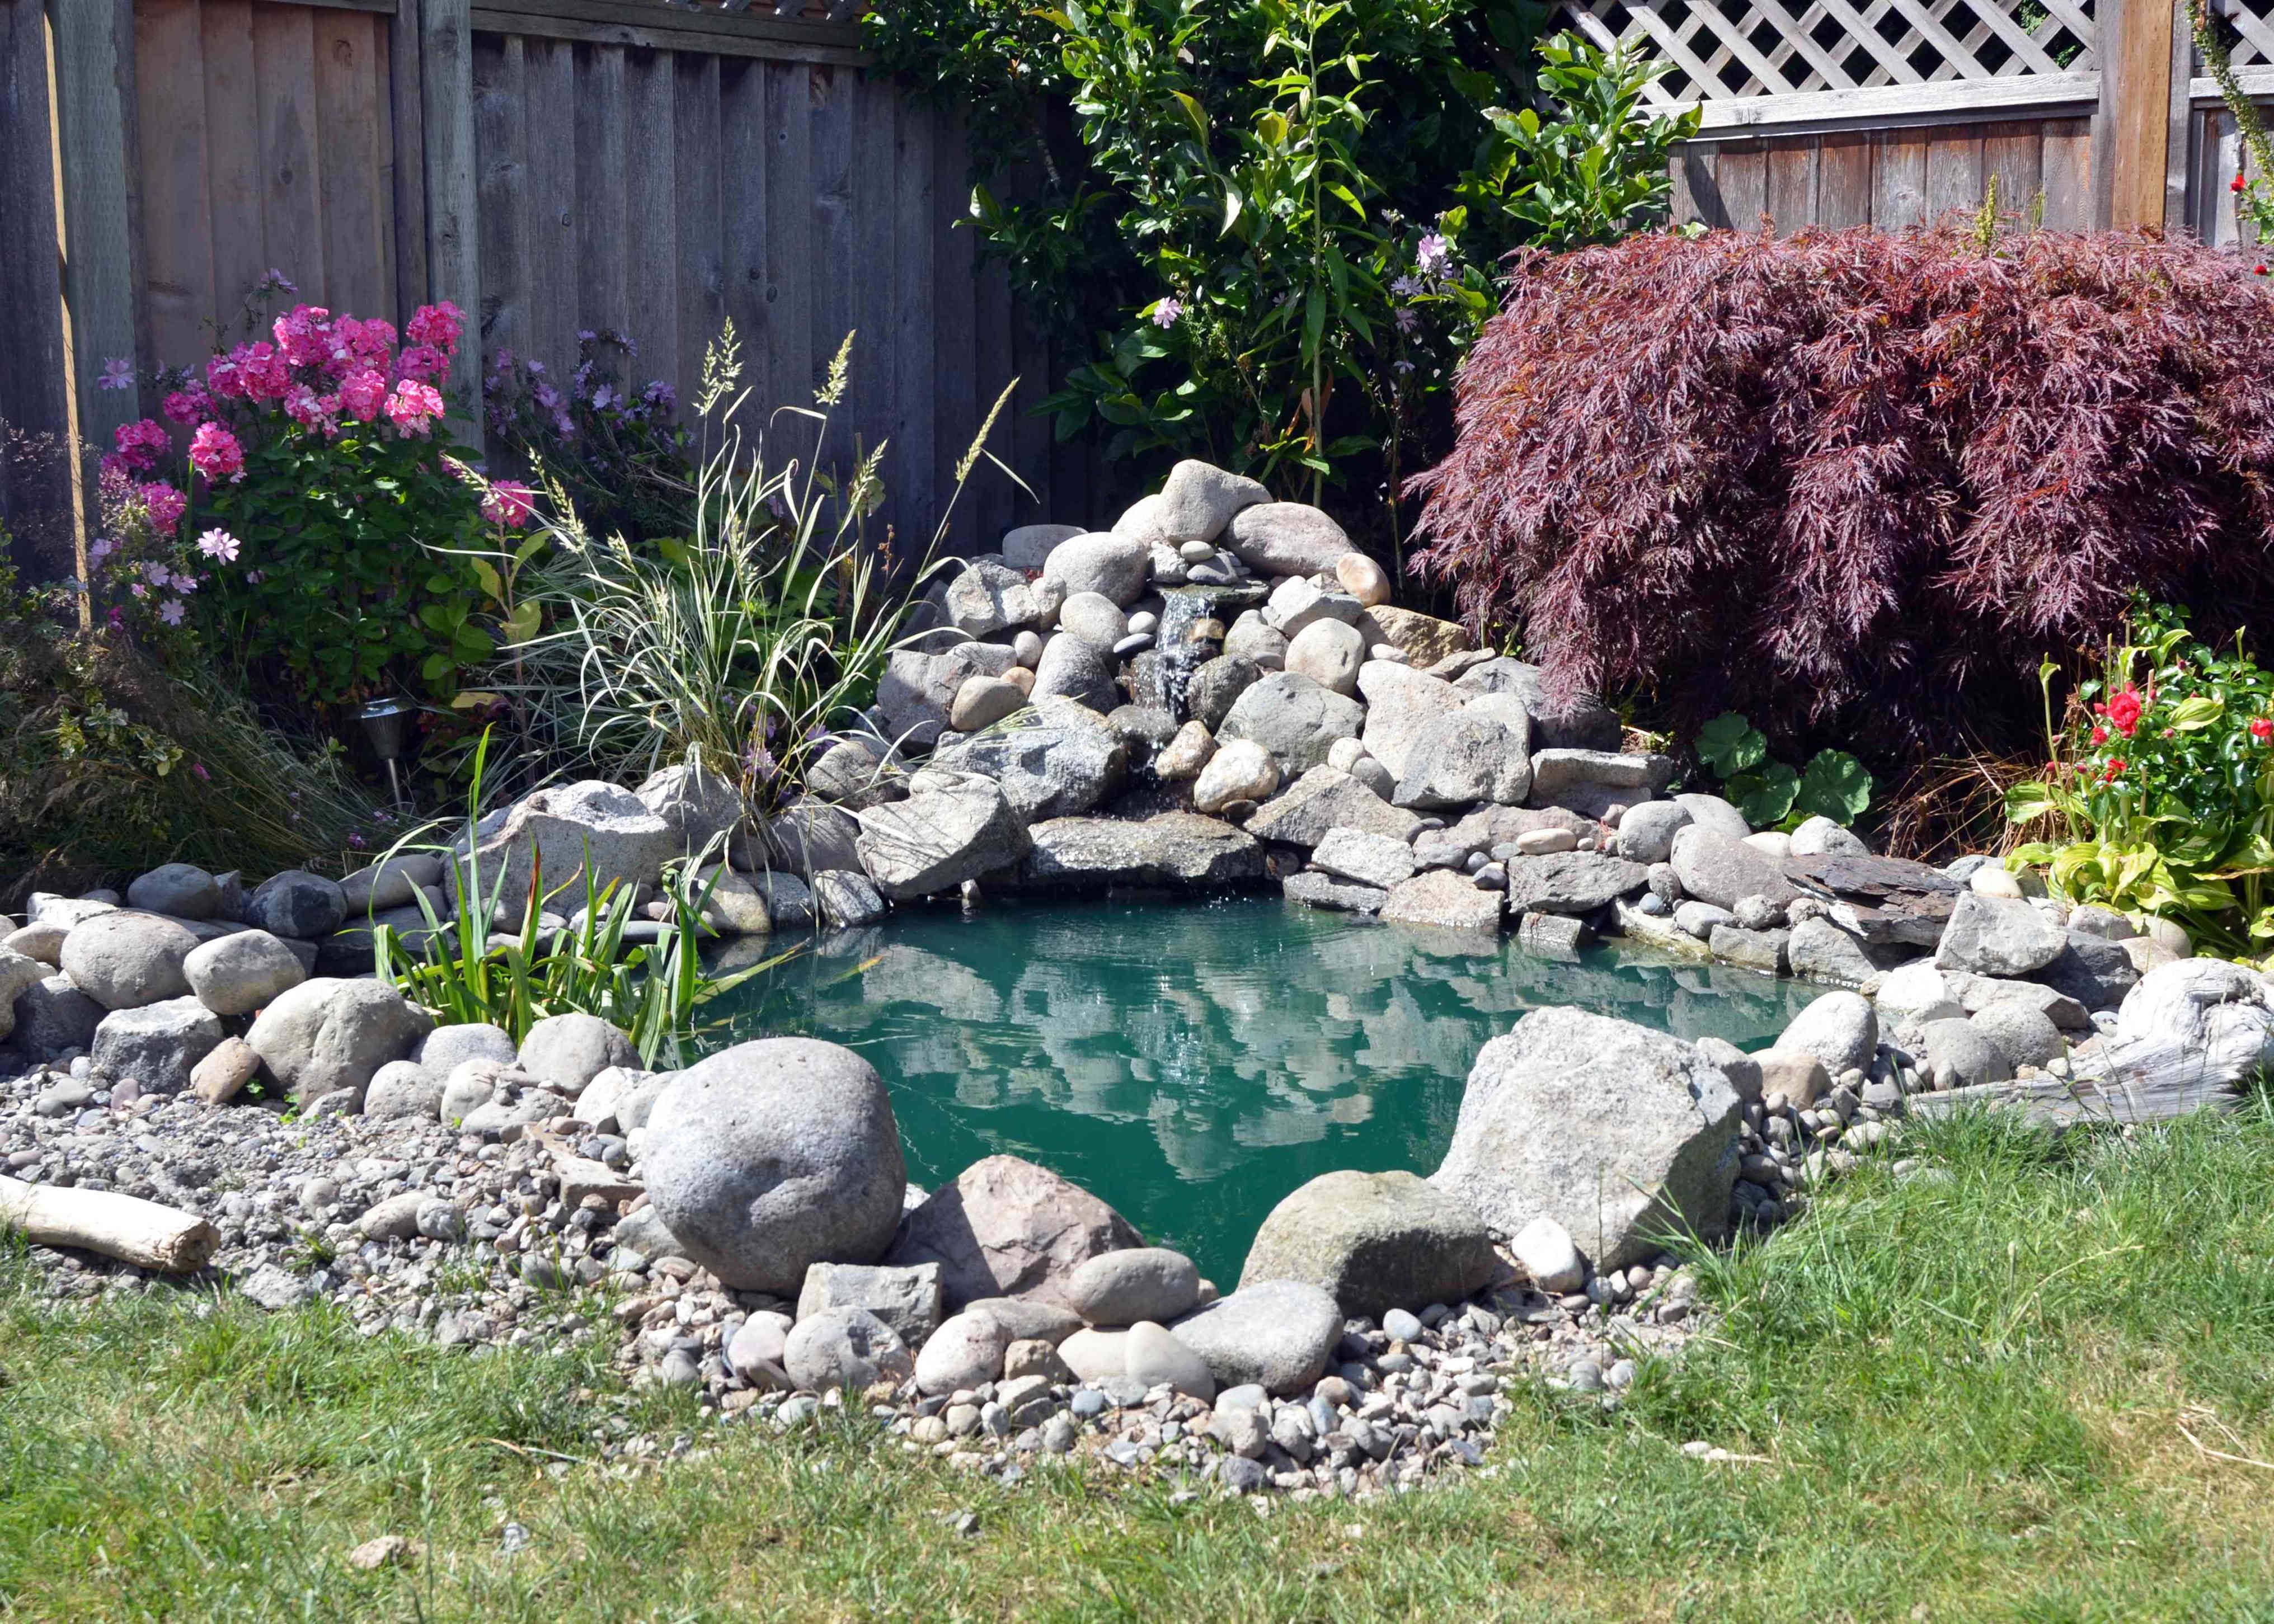 how to, water gardens are a dreamy addition to any yard—here’s how to make one